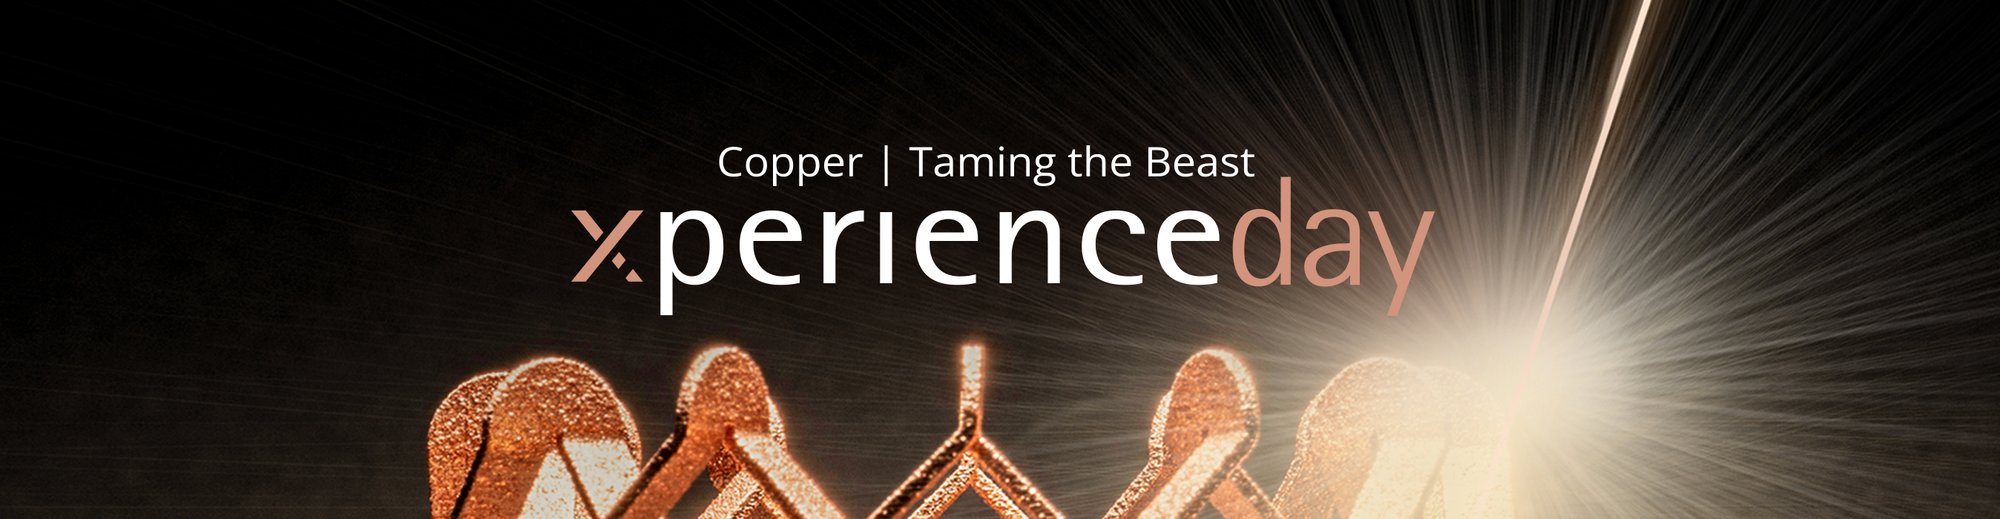 xperienceday_copper_bannerwebsmall_1348x350px_04